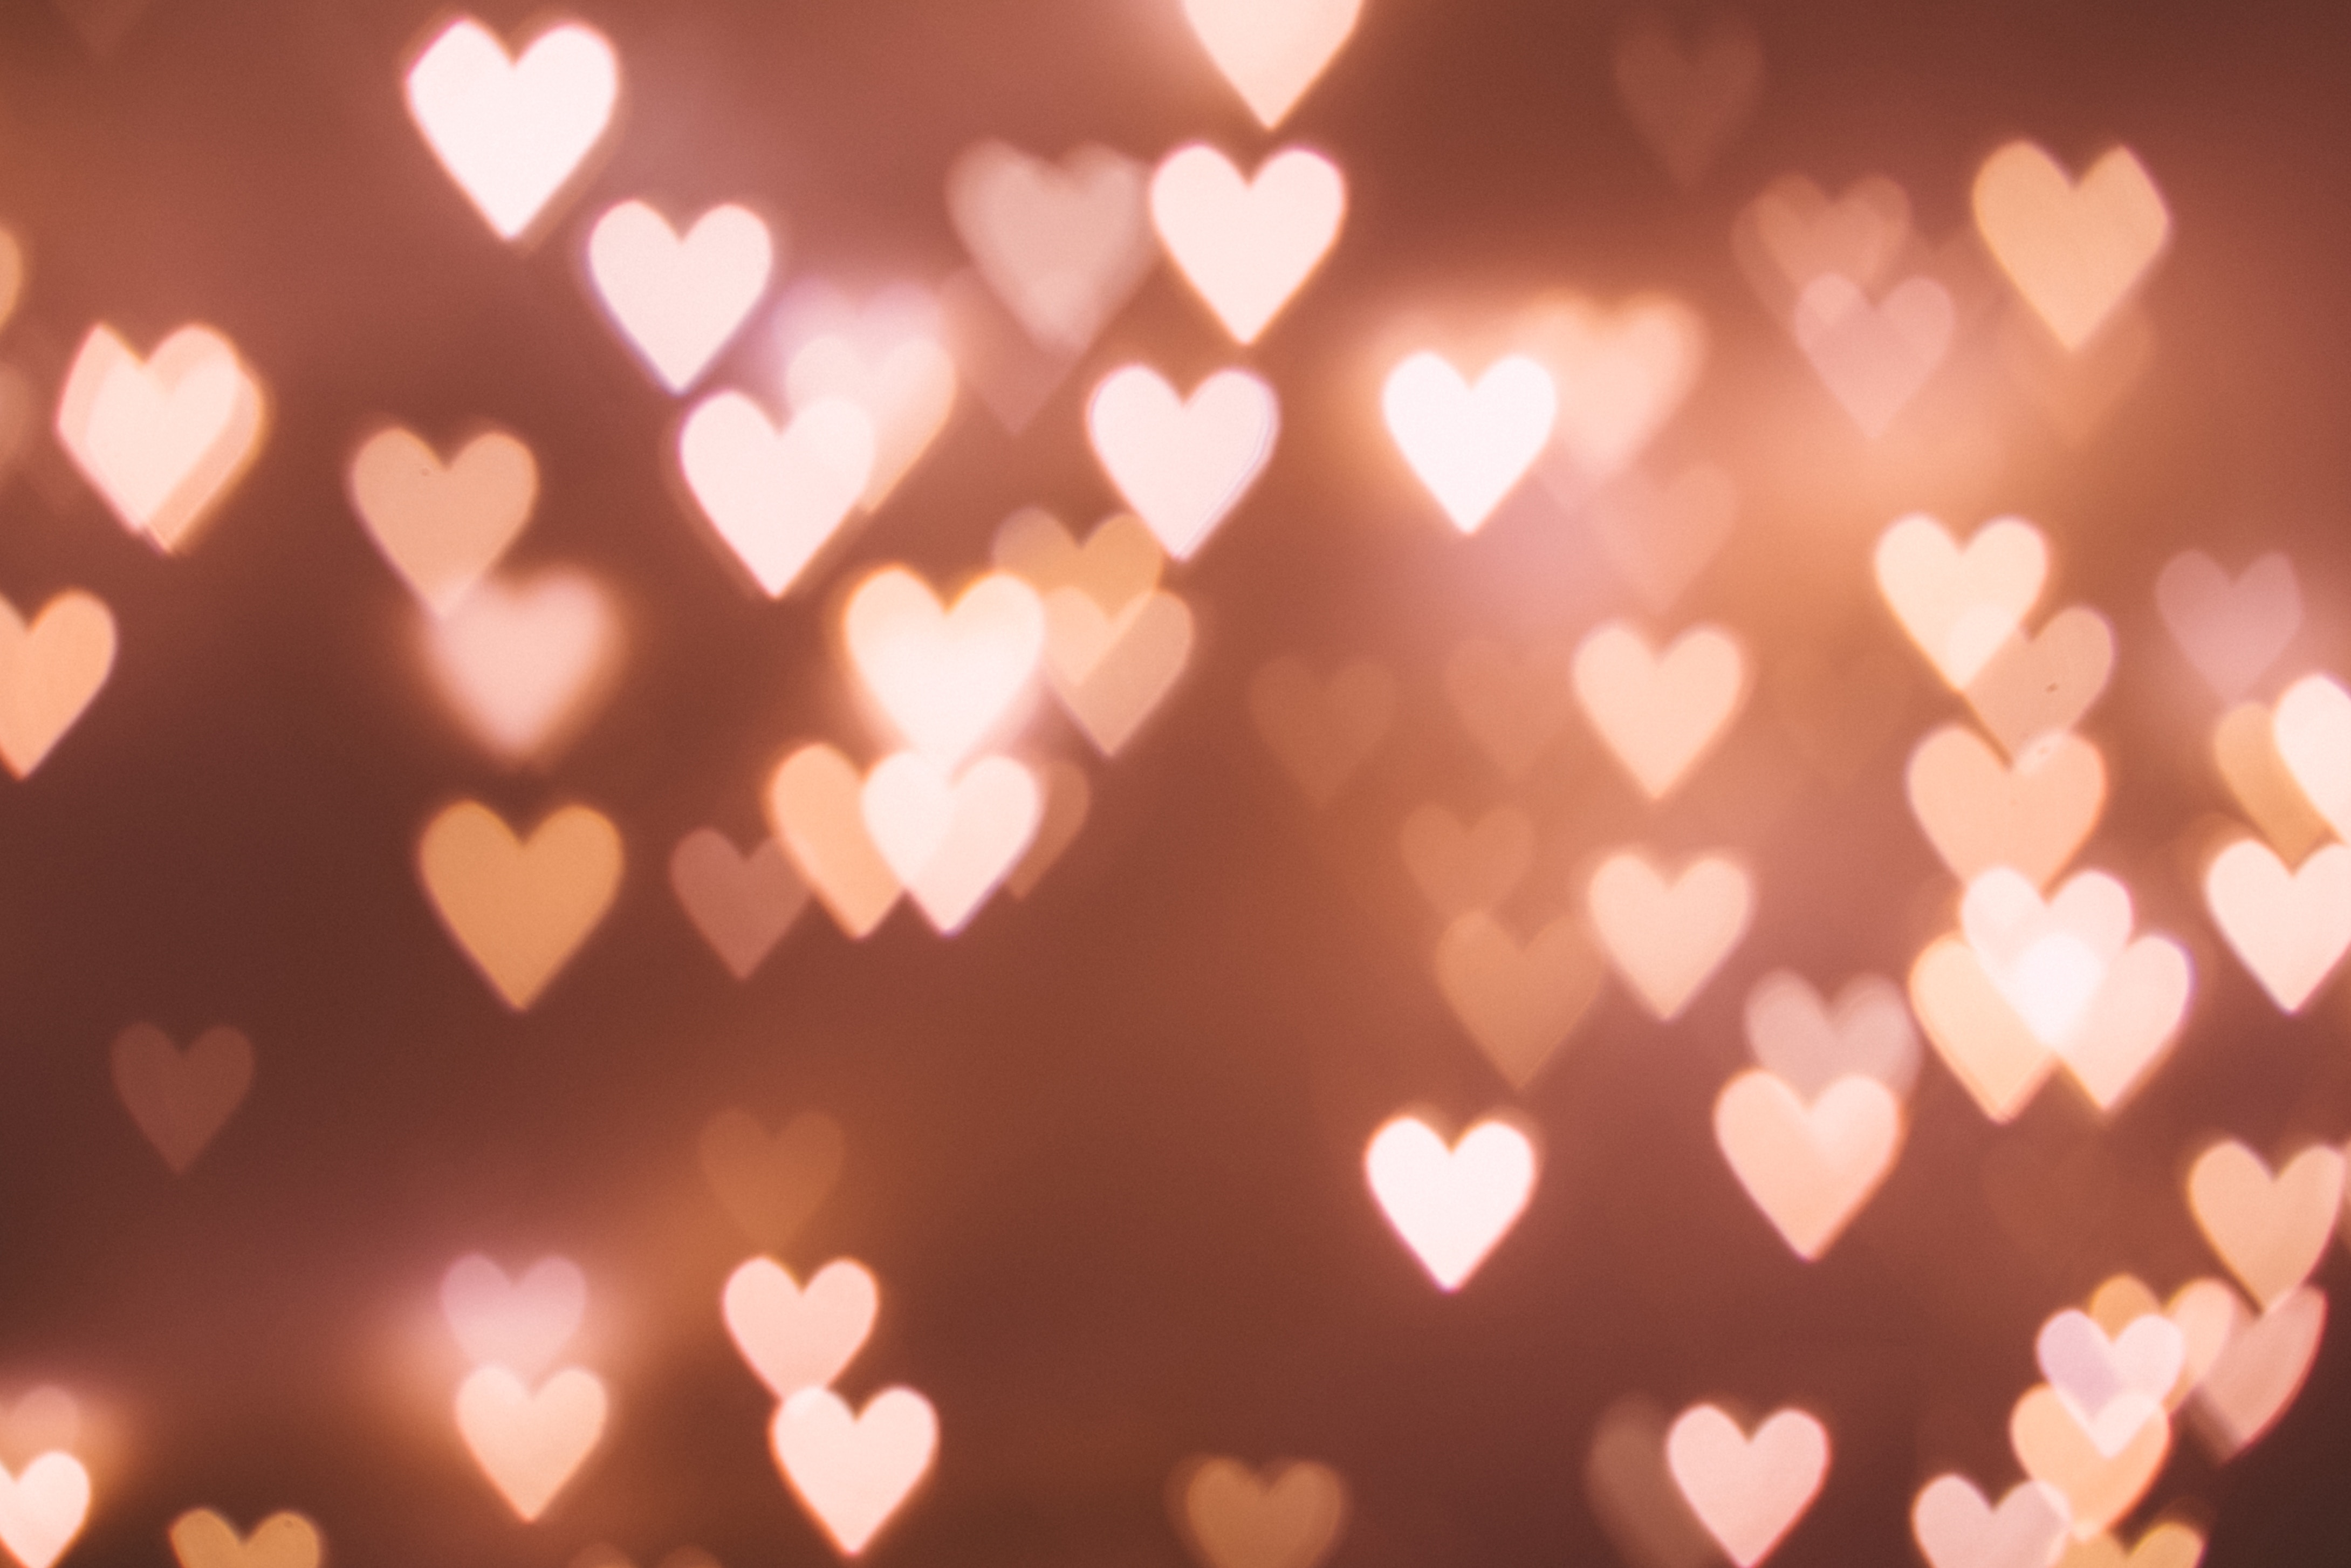 Reincorporate your imagination into this picture!  Unsplash (Public Domain) #hearts #valentinesday #valentinesday #background #love #freetoedit